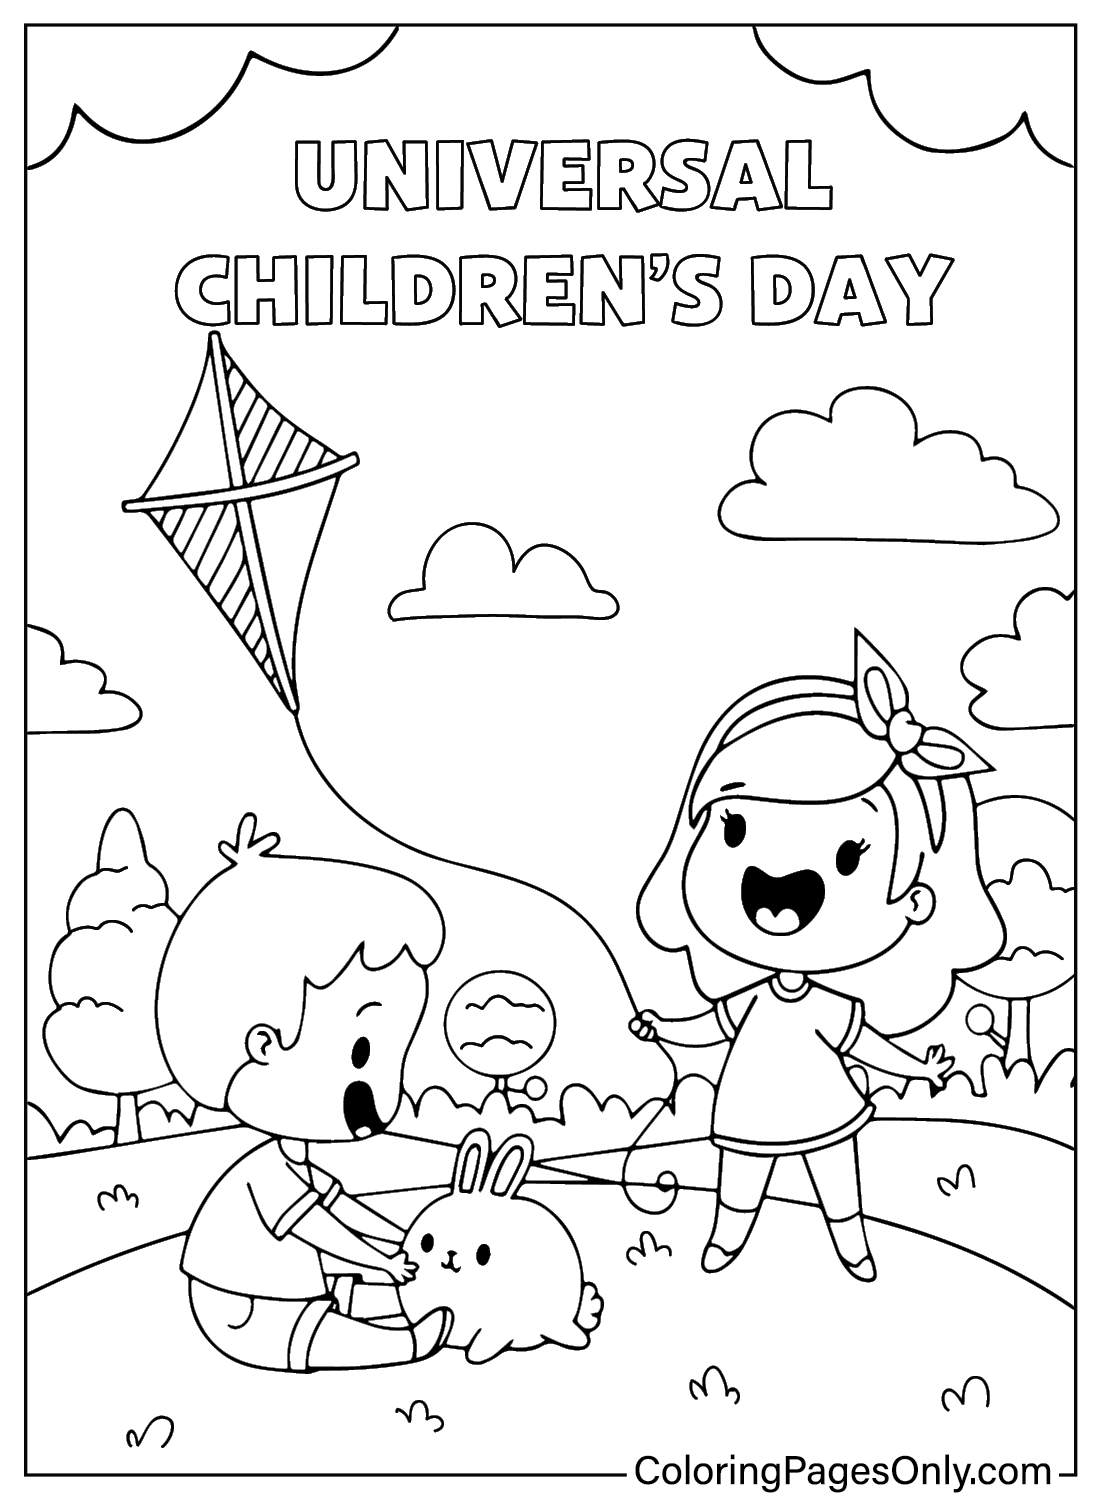 Children’s Day Coloring Page to Print from Children's Day